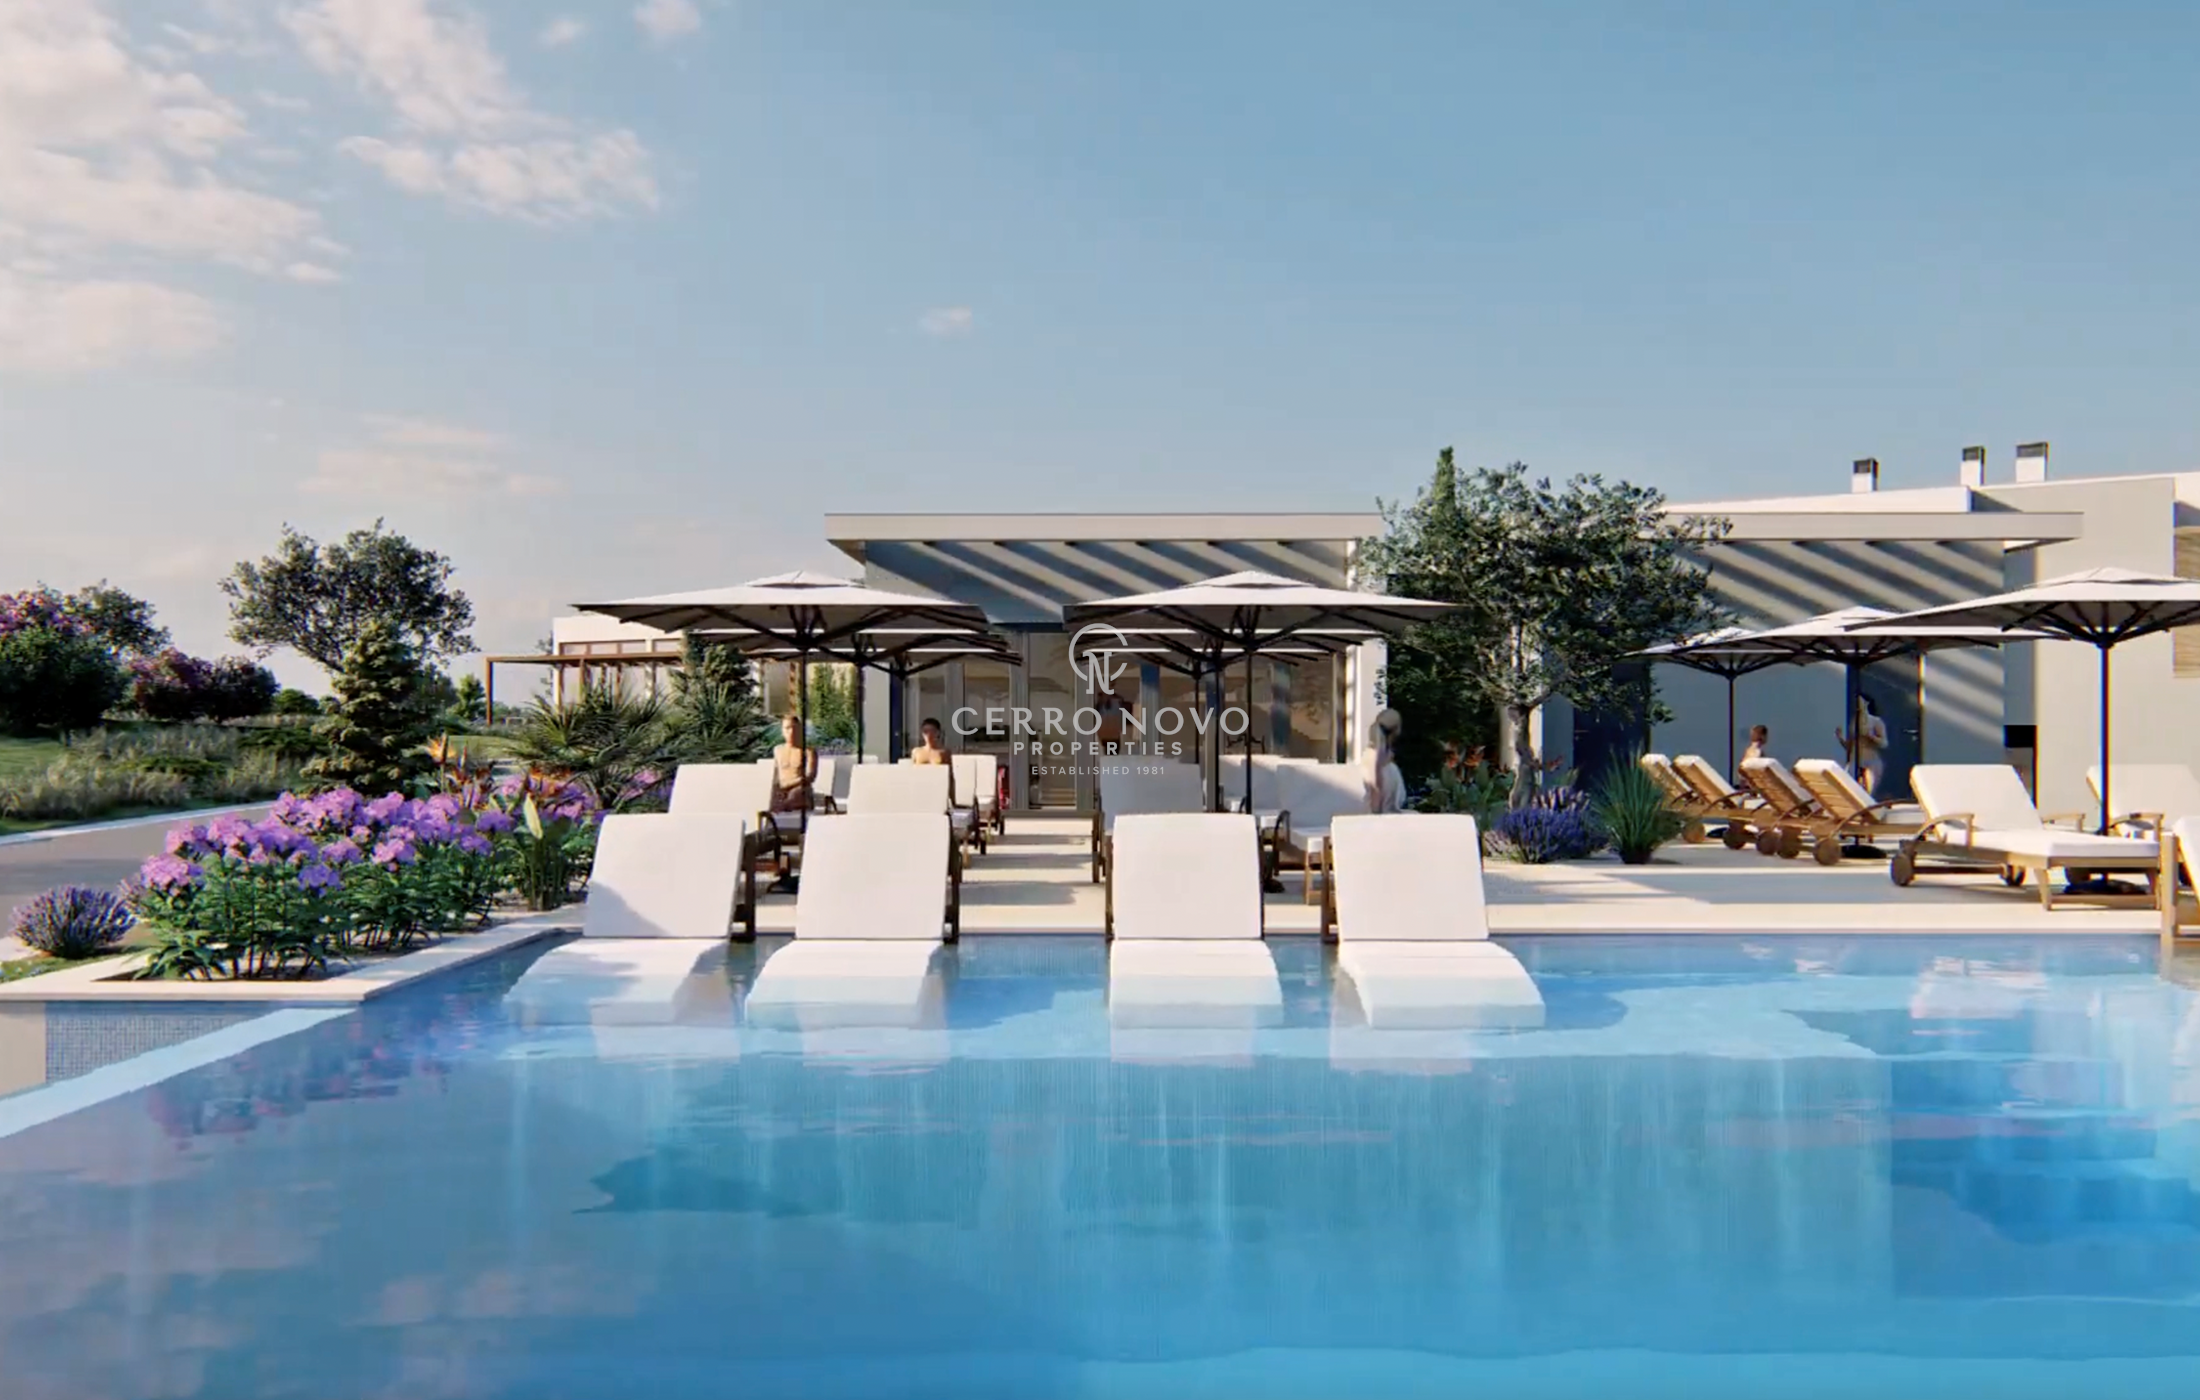 Brand new contemporary villas with private pool in exclusive resort